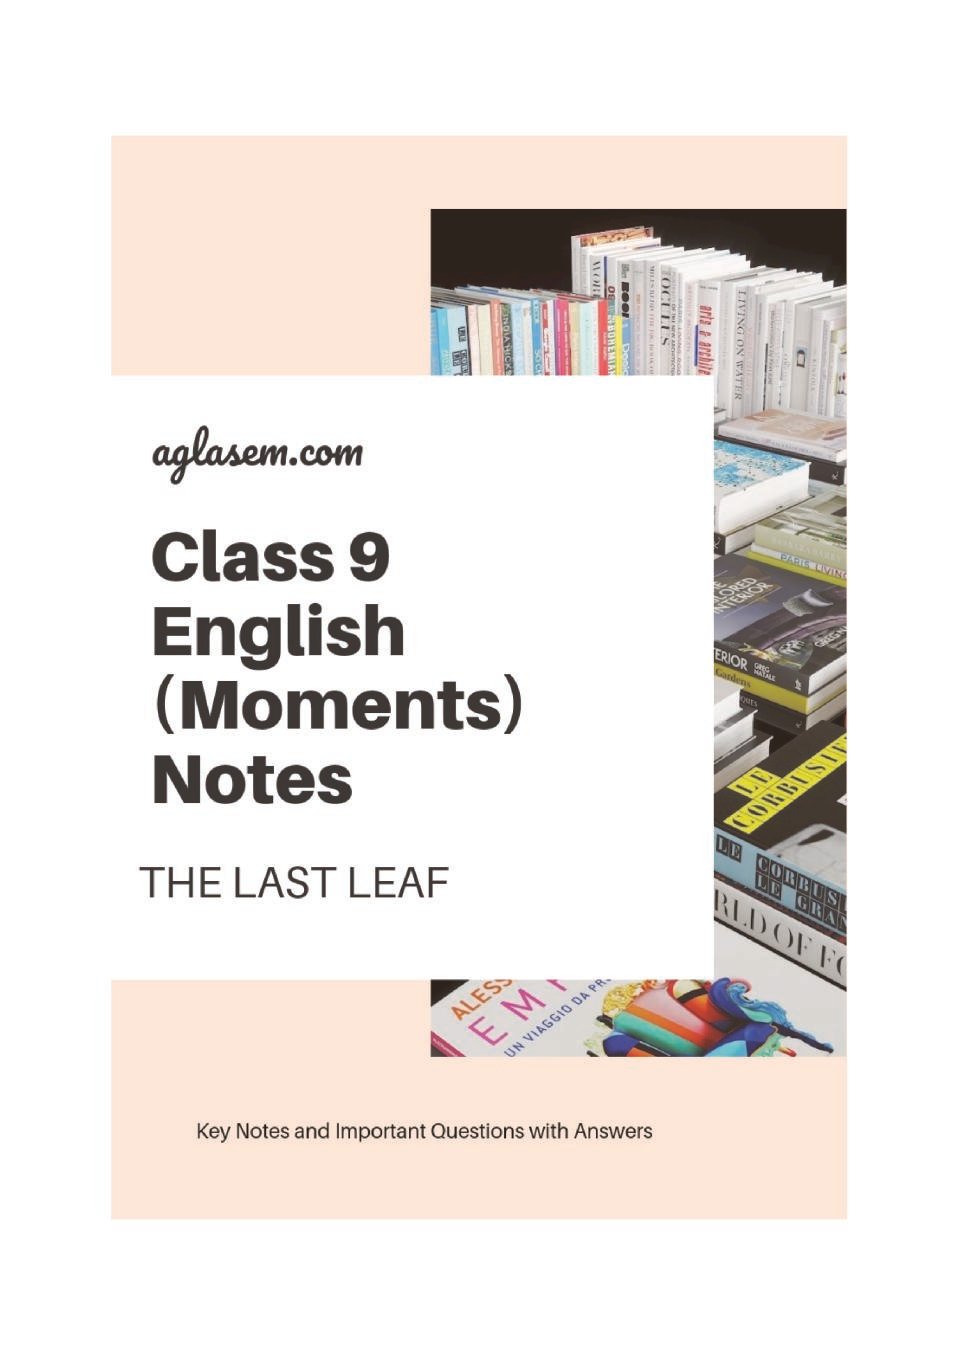 Class 9 English Moments Notes For The Last Leaf - Page 1